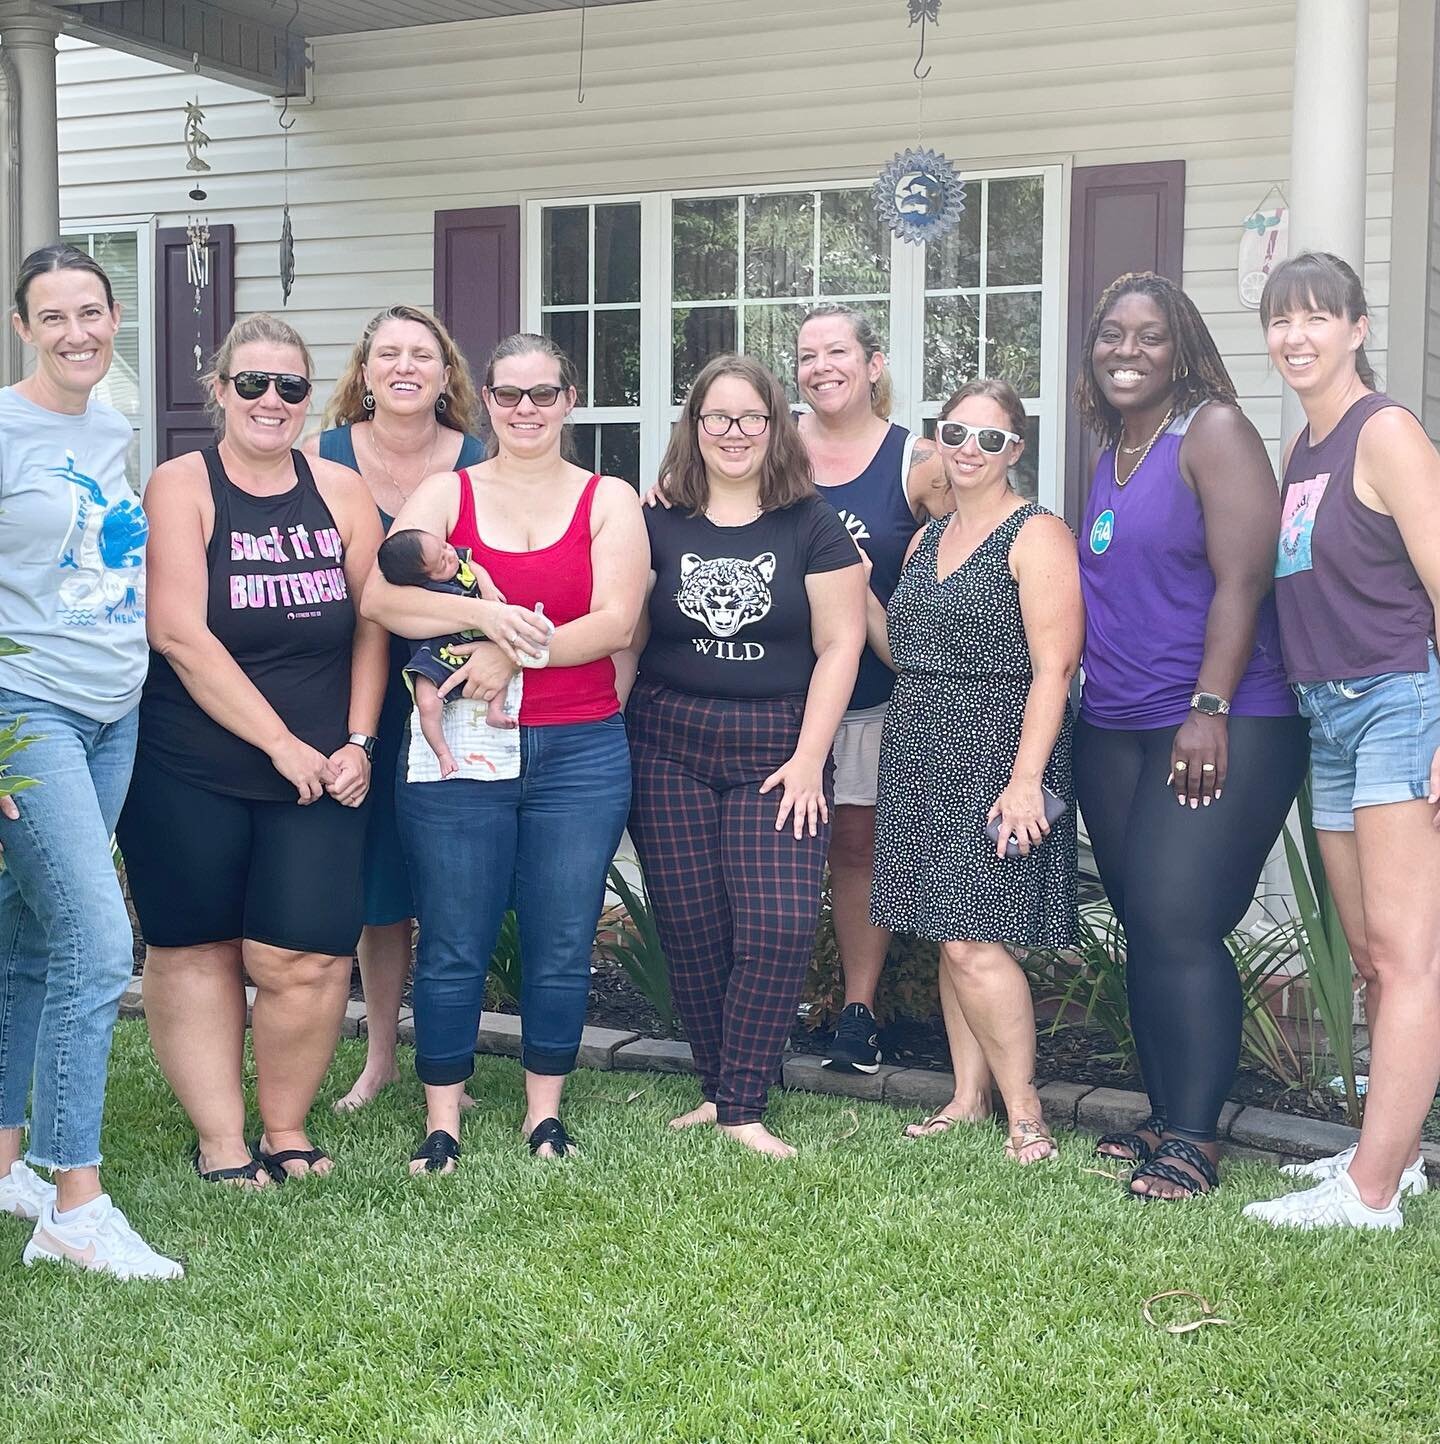 The ladies of @fia_goosecreek held a lasagna making party and made 24 lasagnas for our Beyond Delivery program. We are so grateful to the community for giving back to our moms through this program. If you have a group that would like to host a lasagn